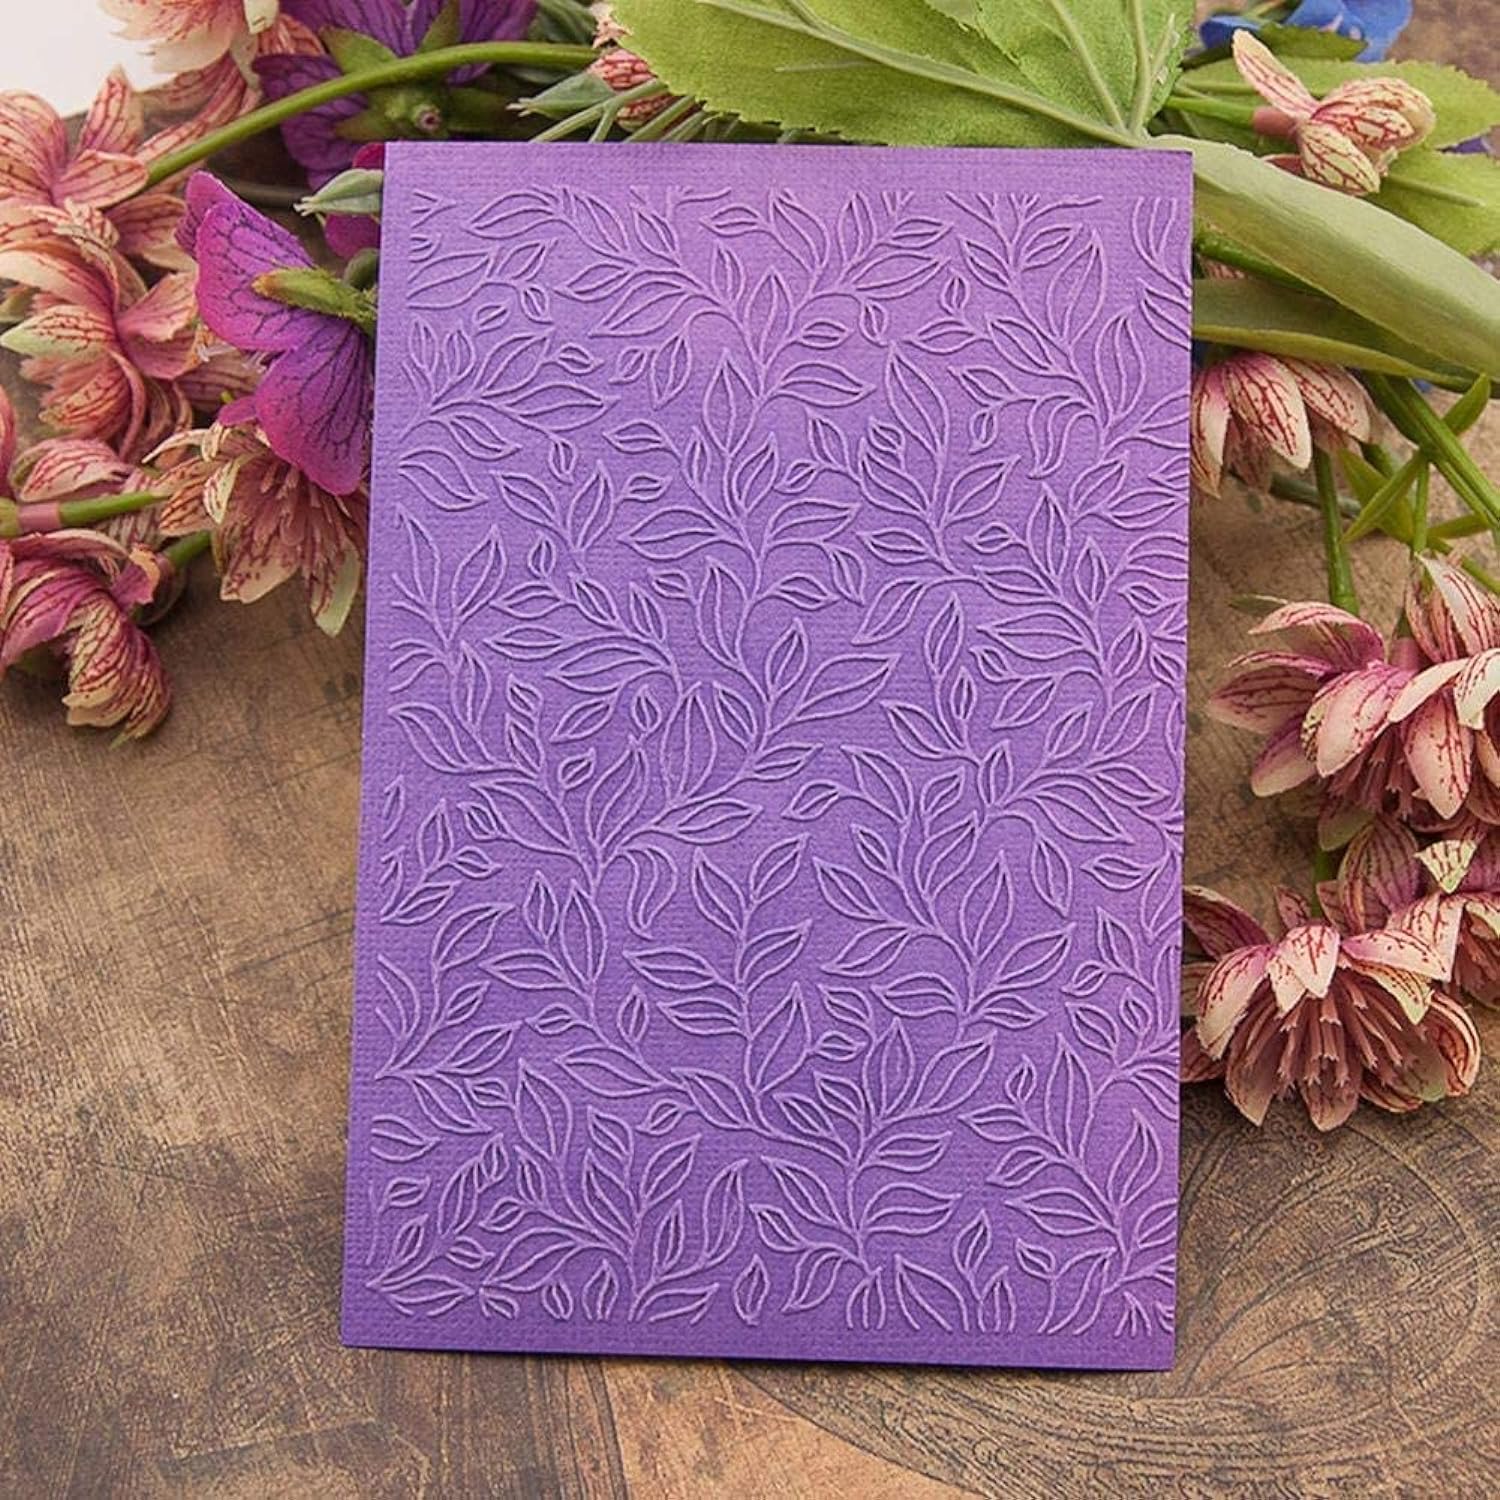 Great Choice Products Leaf Flower Plastic Embossing Folder Template Diy Scrapbooking Reusable Plastic Flower For Album Card Embossing Folders …